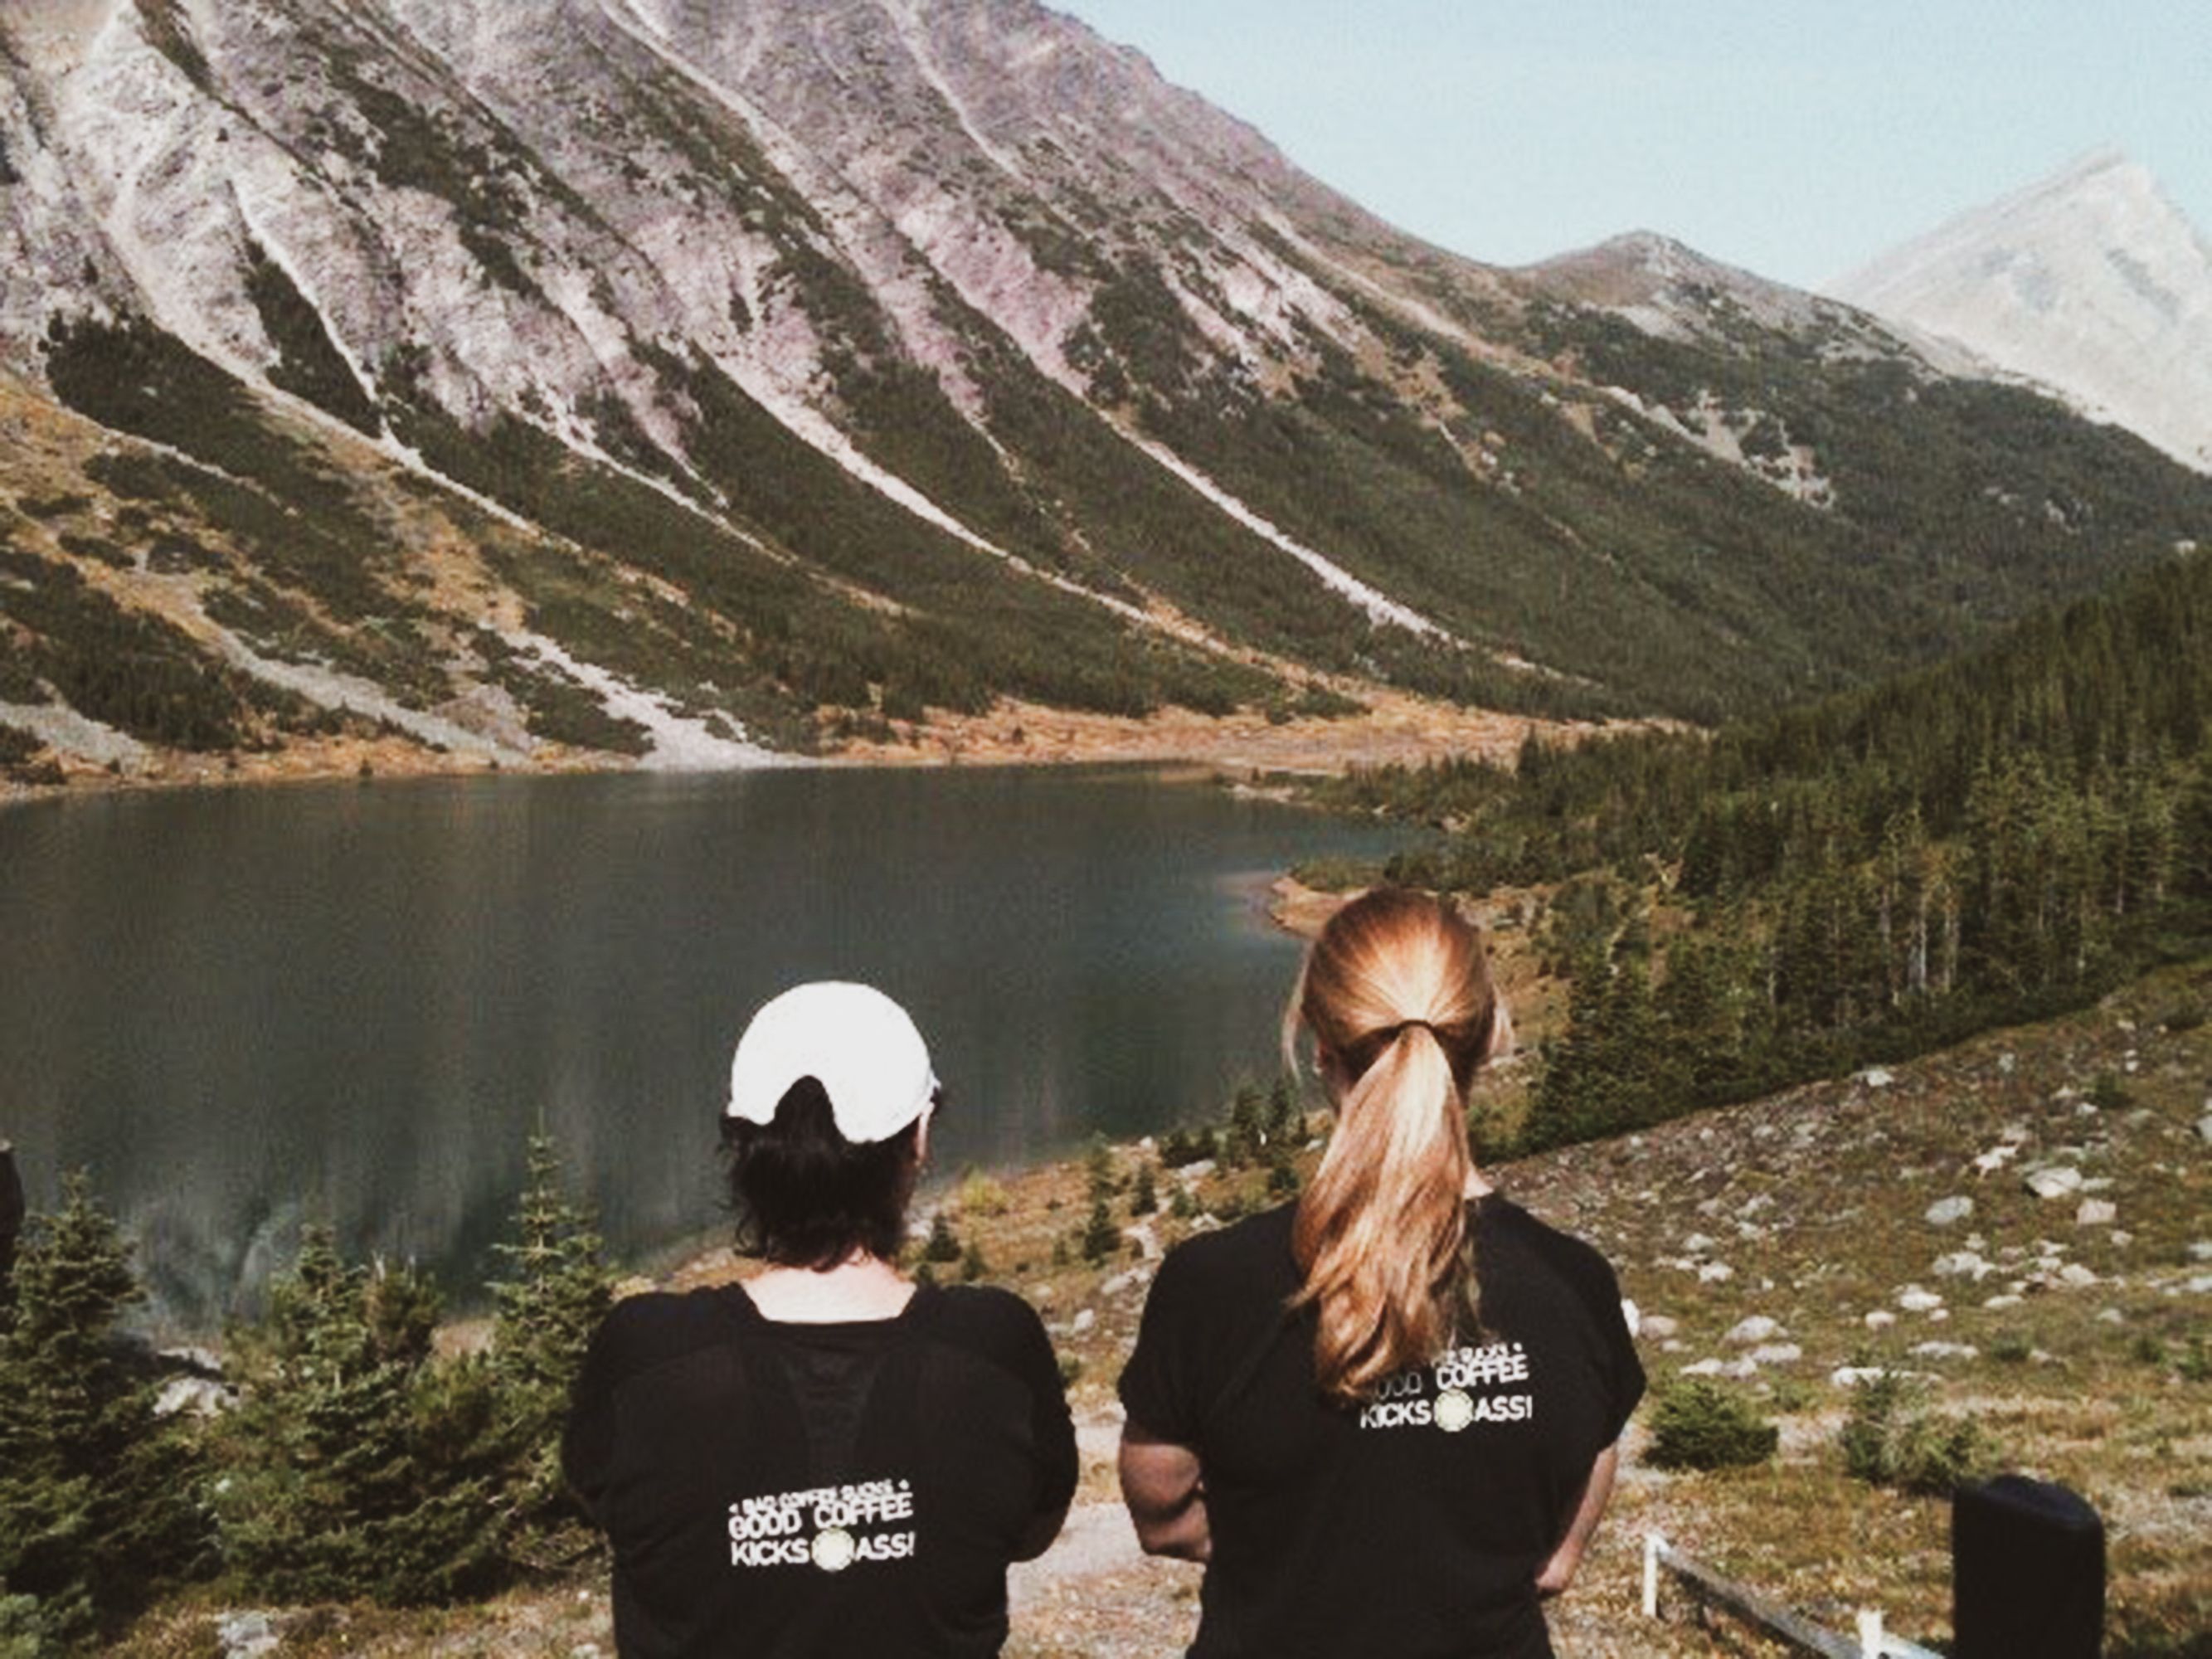 Two Kicking Horse Coffee Employees Overlooking Lake and Mountains 